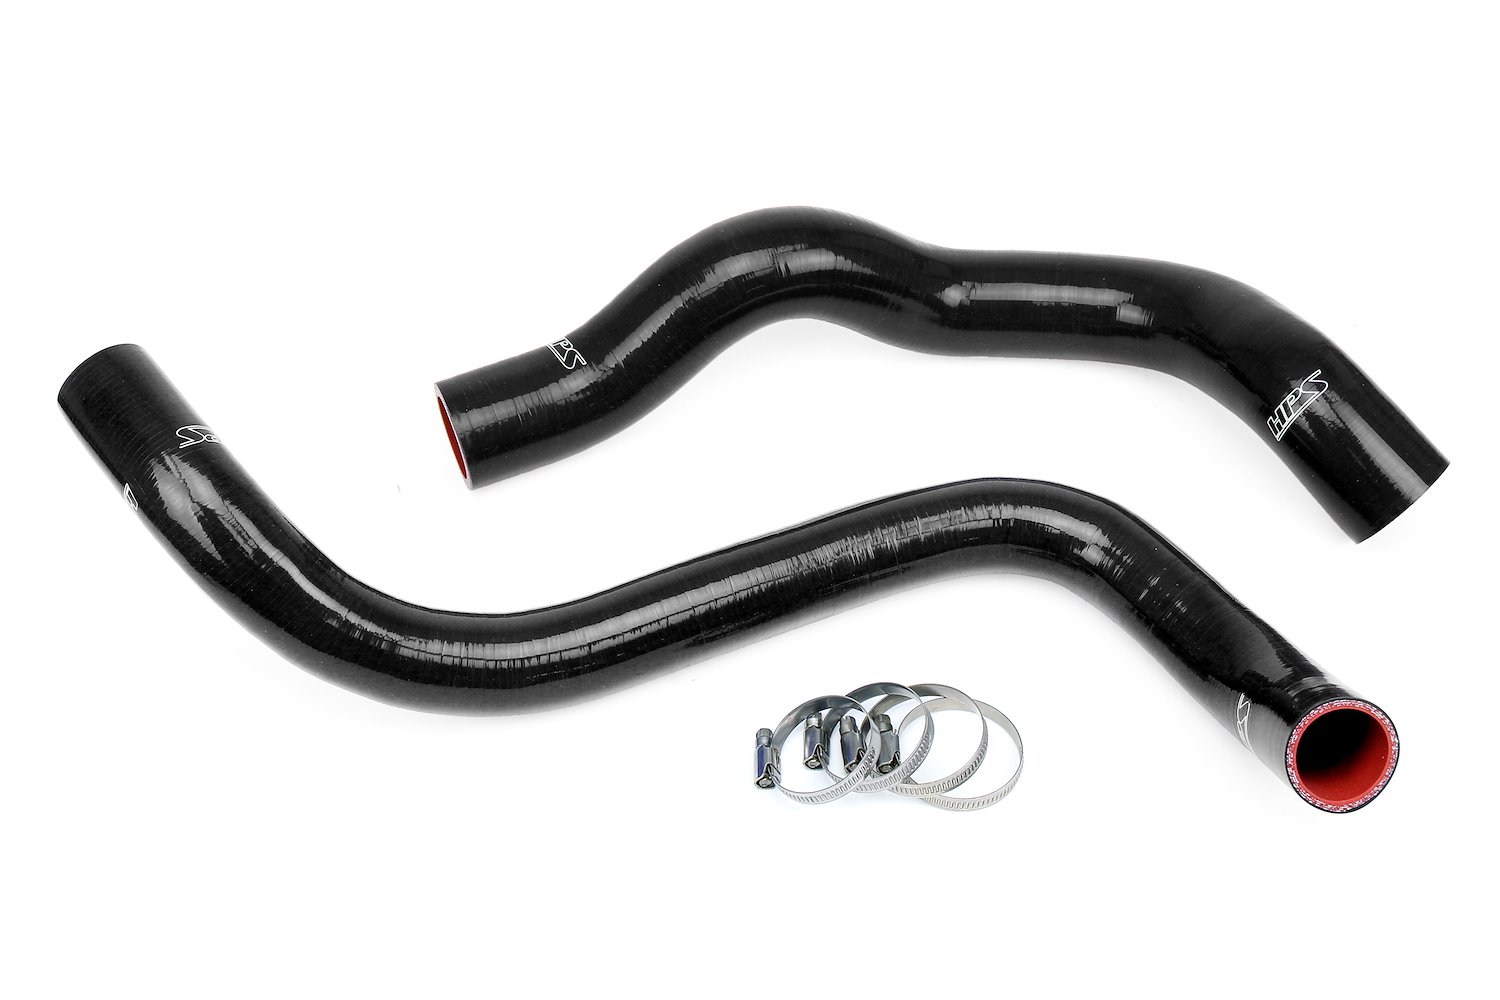 57-1903-BLK Radiator Hose Kit, 3-Ply Reinforced Silicone, Replaces Rubber Radiator Coolant Hoses